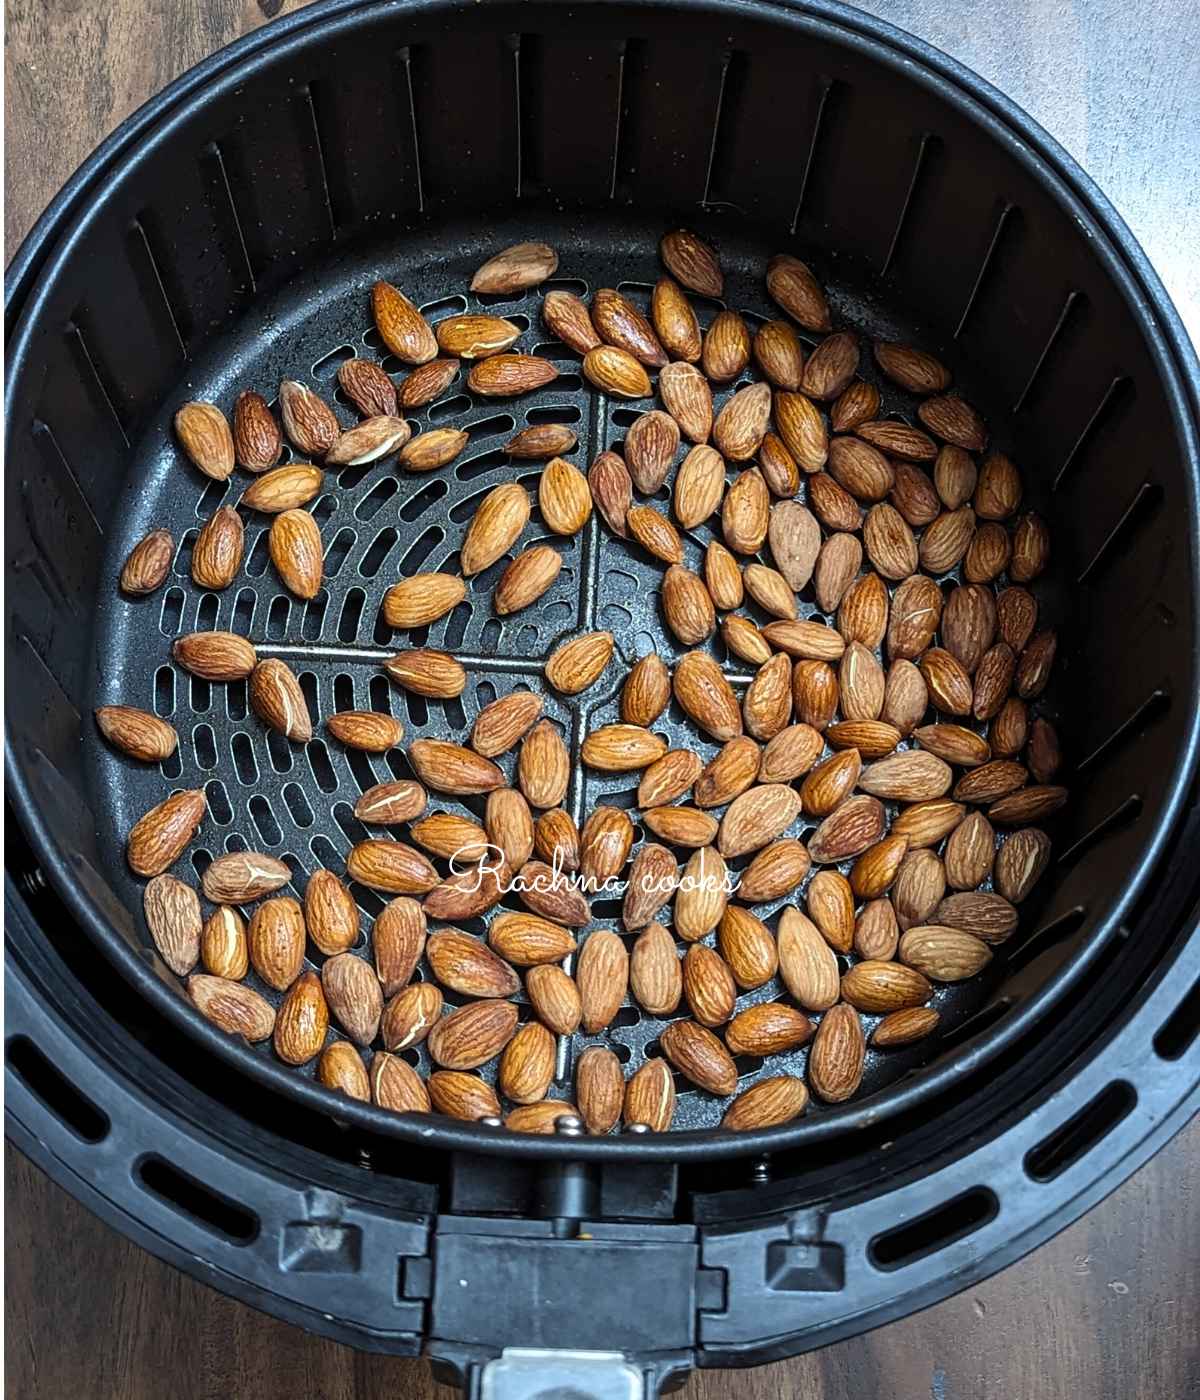 Roasted almonds after air frying in air fryer basket.